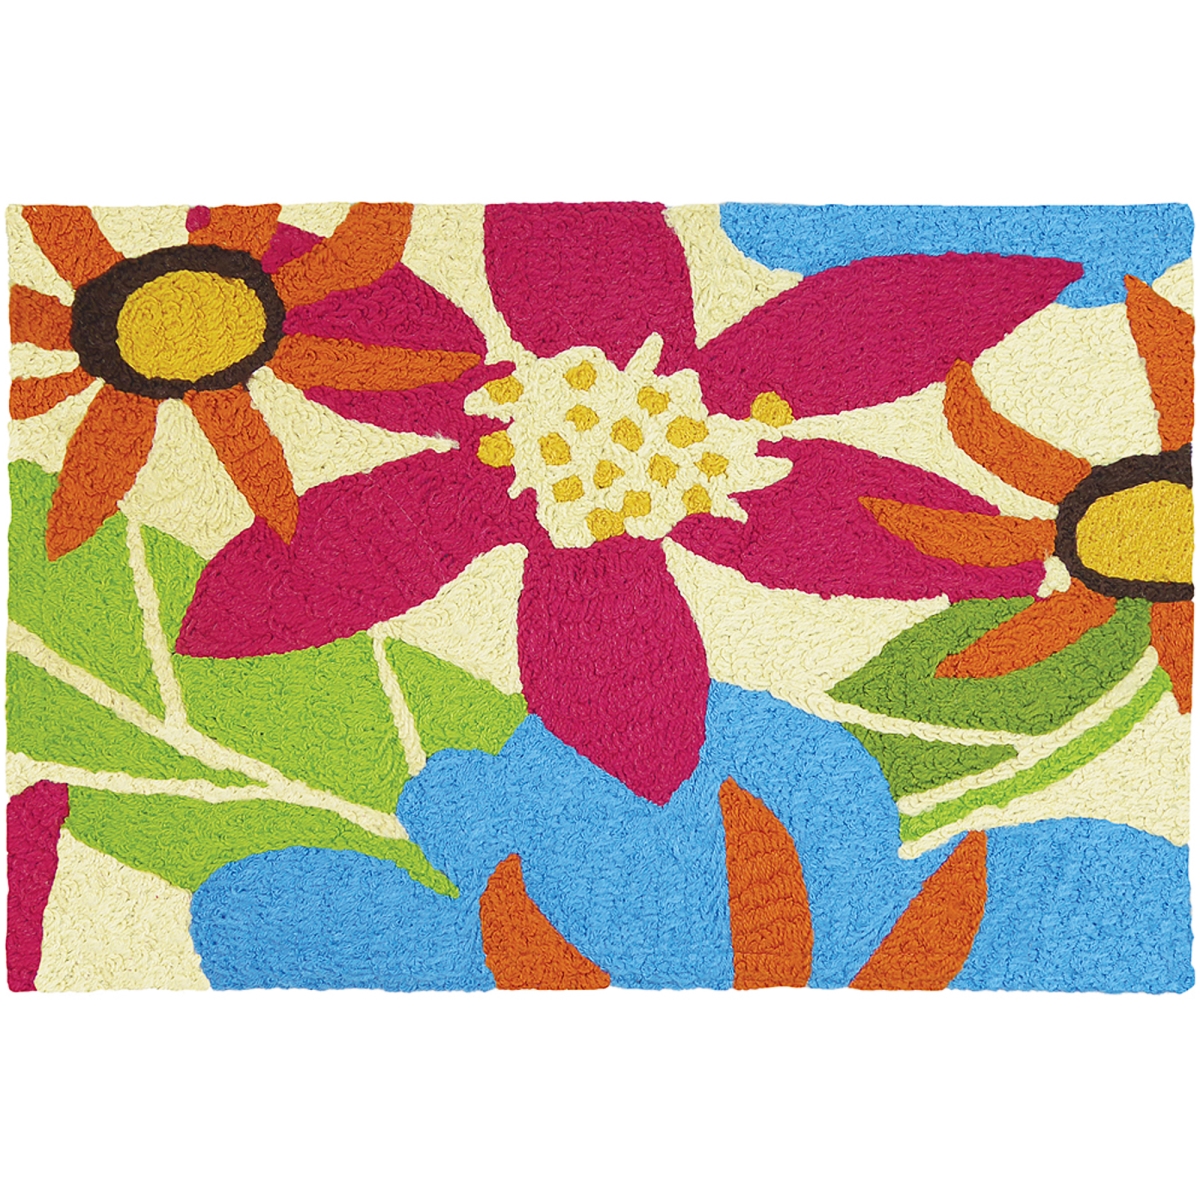 Jio-hd019b 21 X 33 In. Piccadilly Floral Indoor & Outdoor Area Rug